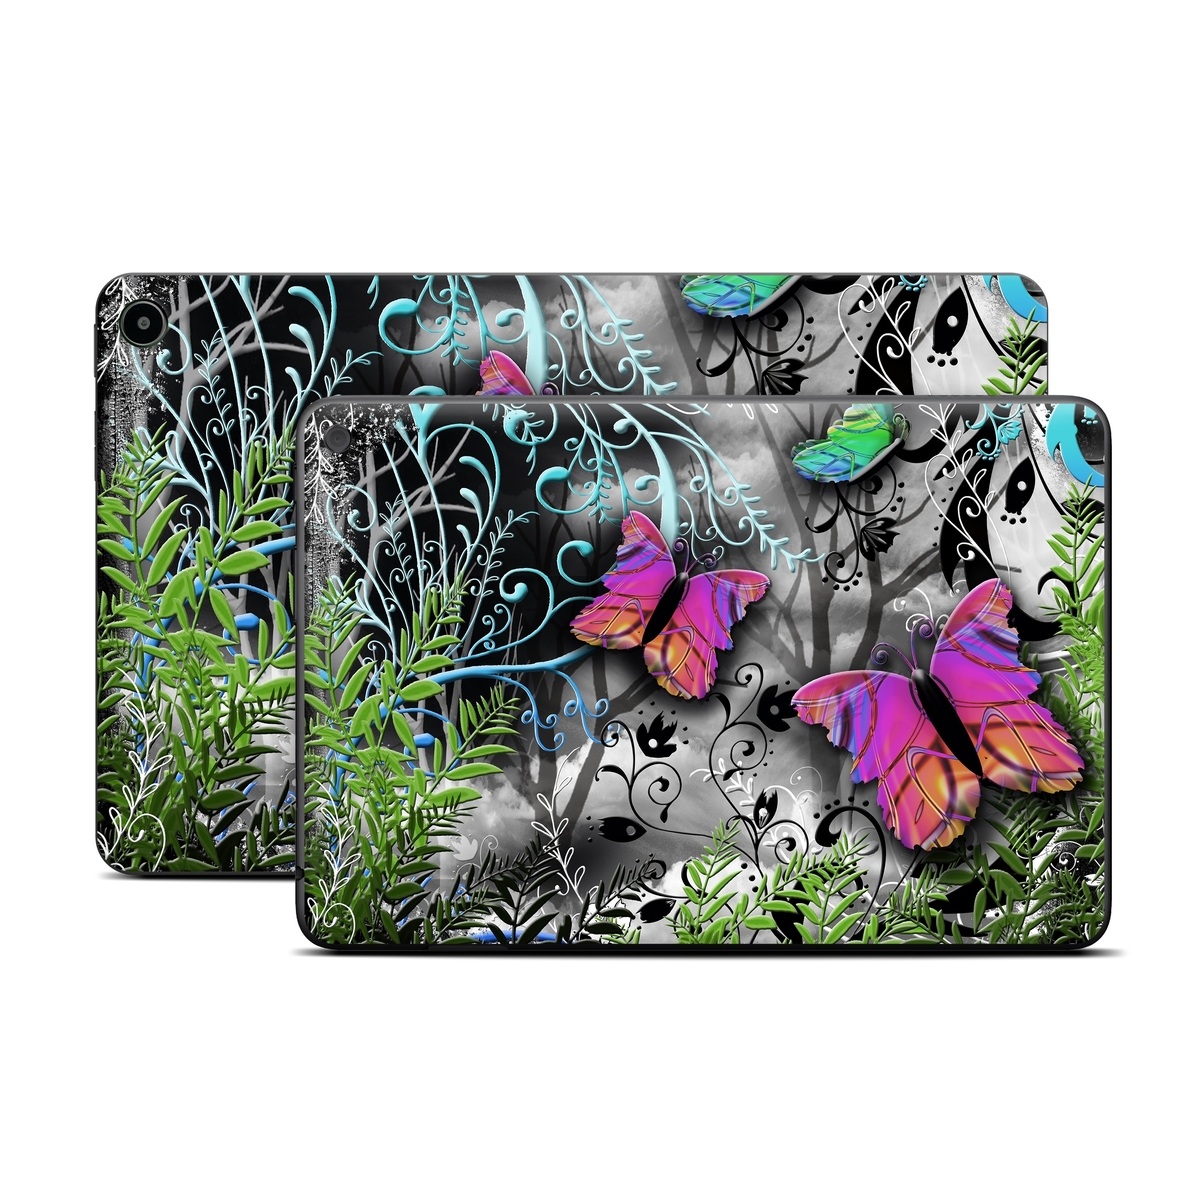 Amazon Fire Tablet Series Skin Skin design of Butterfly, Pink, Purple, Violet, Organism, Spring, Moths and butterflies, Botany, Plant, Leaf, with black, gray, green, purple, red colors